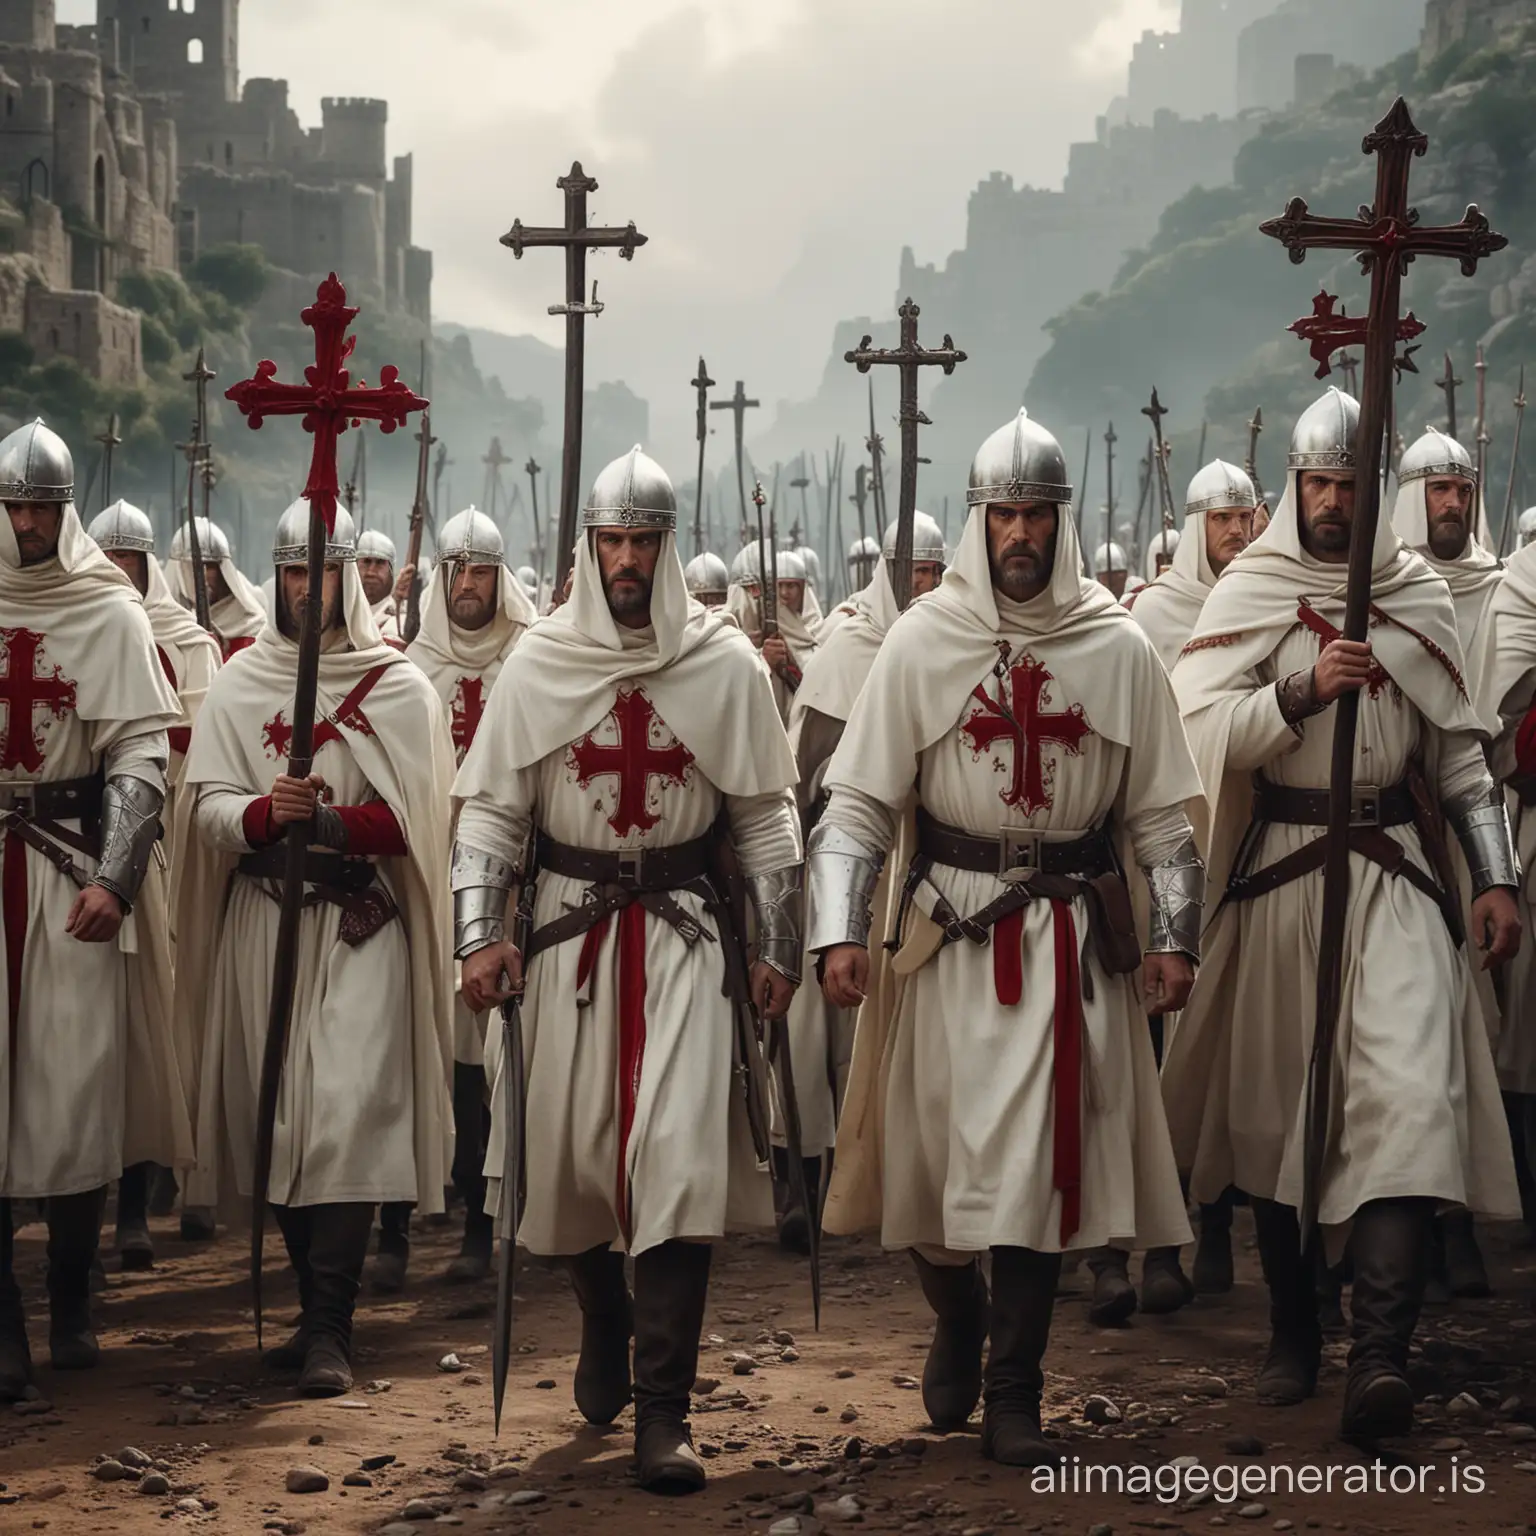 Hyper realistic color epic cinematography of Cathare crusaders marching to battle holding their crosses up, wearing white clothes with red Occitane cross, illluminted by a single light